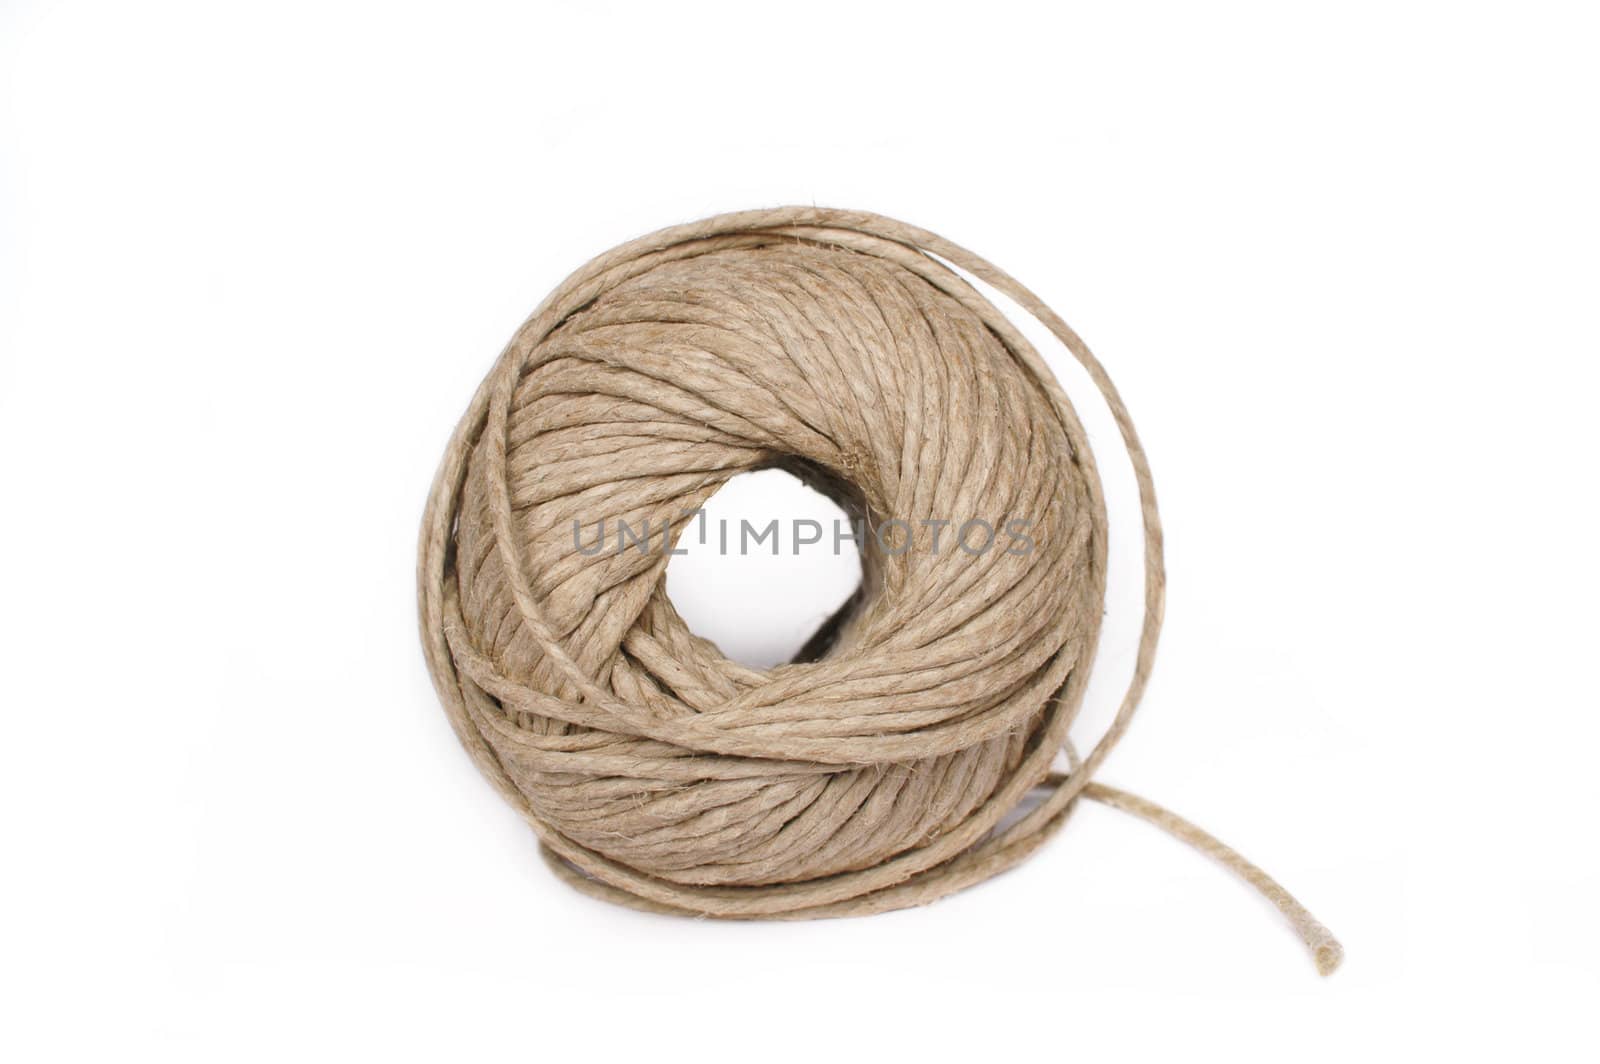 Ball of string isolated on white